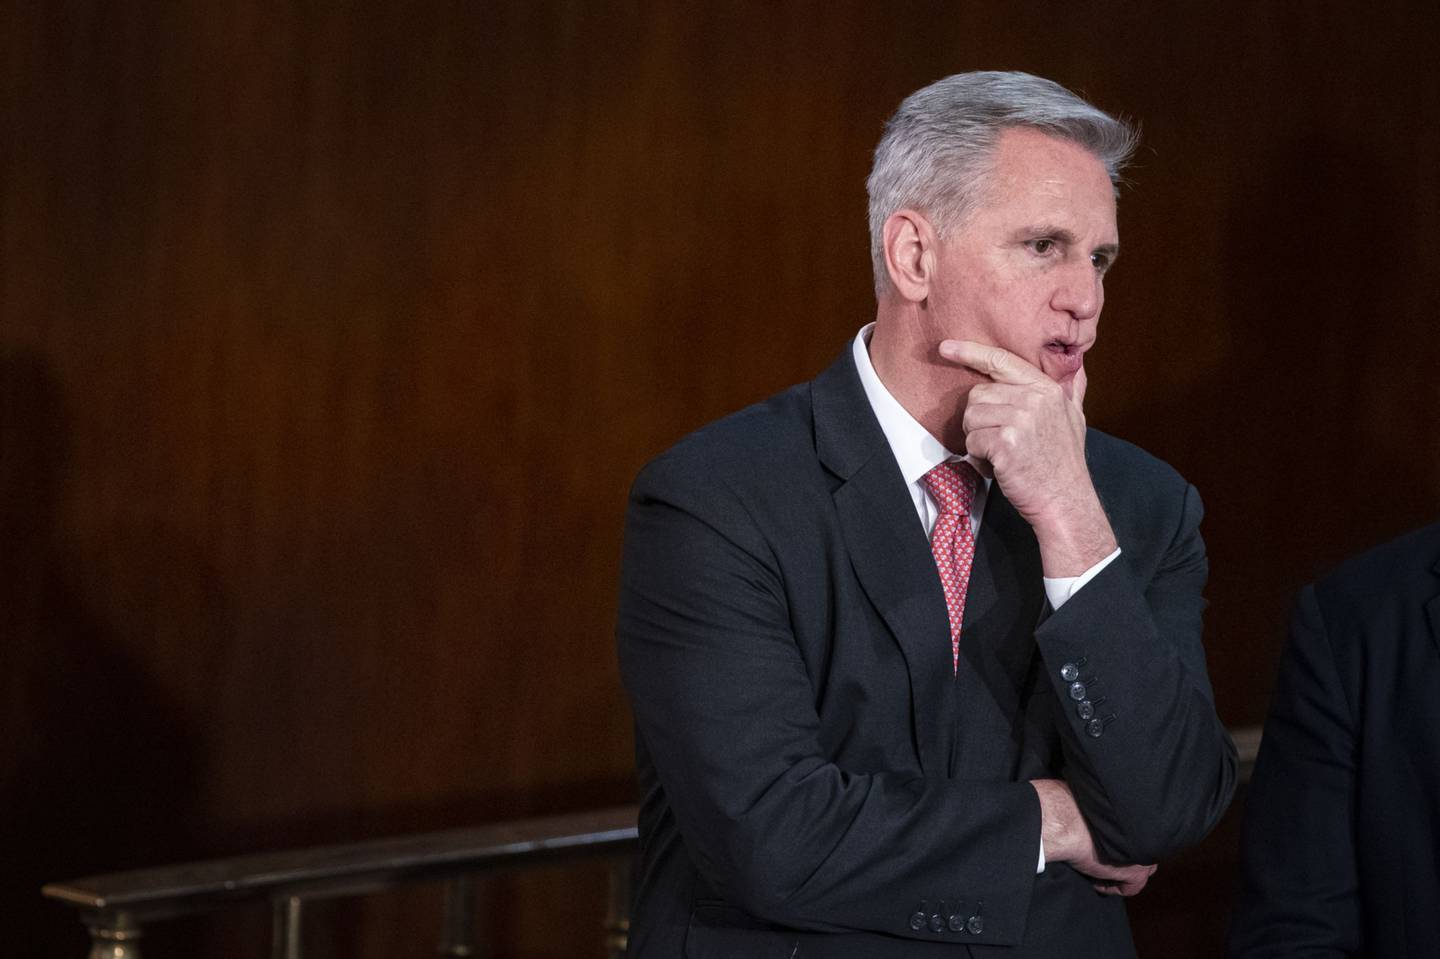 Representative Kevin McCarthy on January 5, after being blocked for the 11th time in his bid to become Speaker. Bloomberg